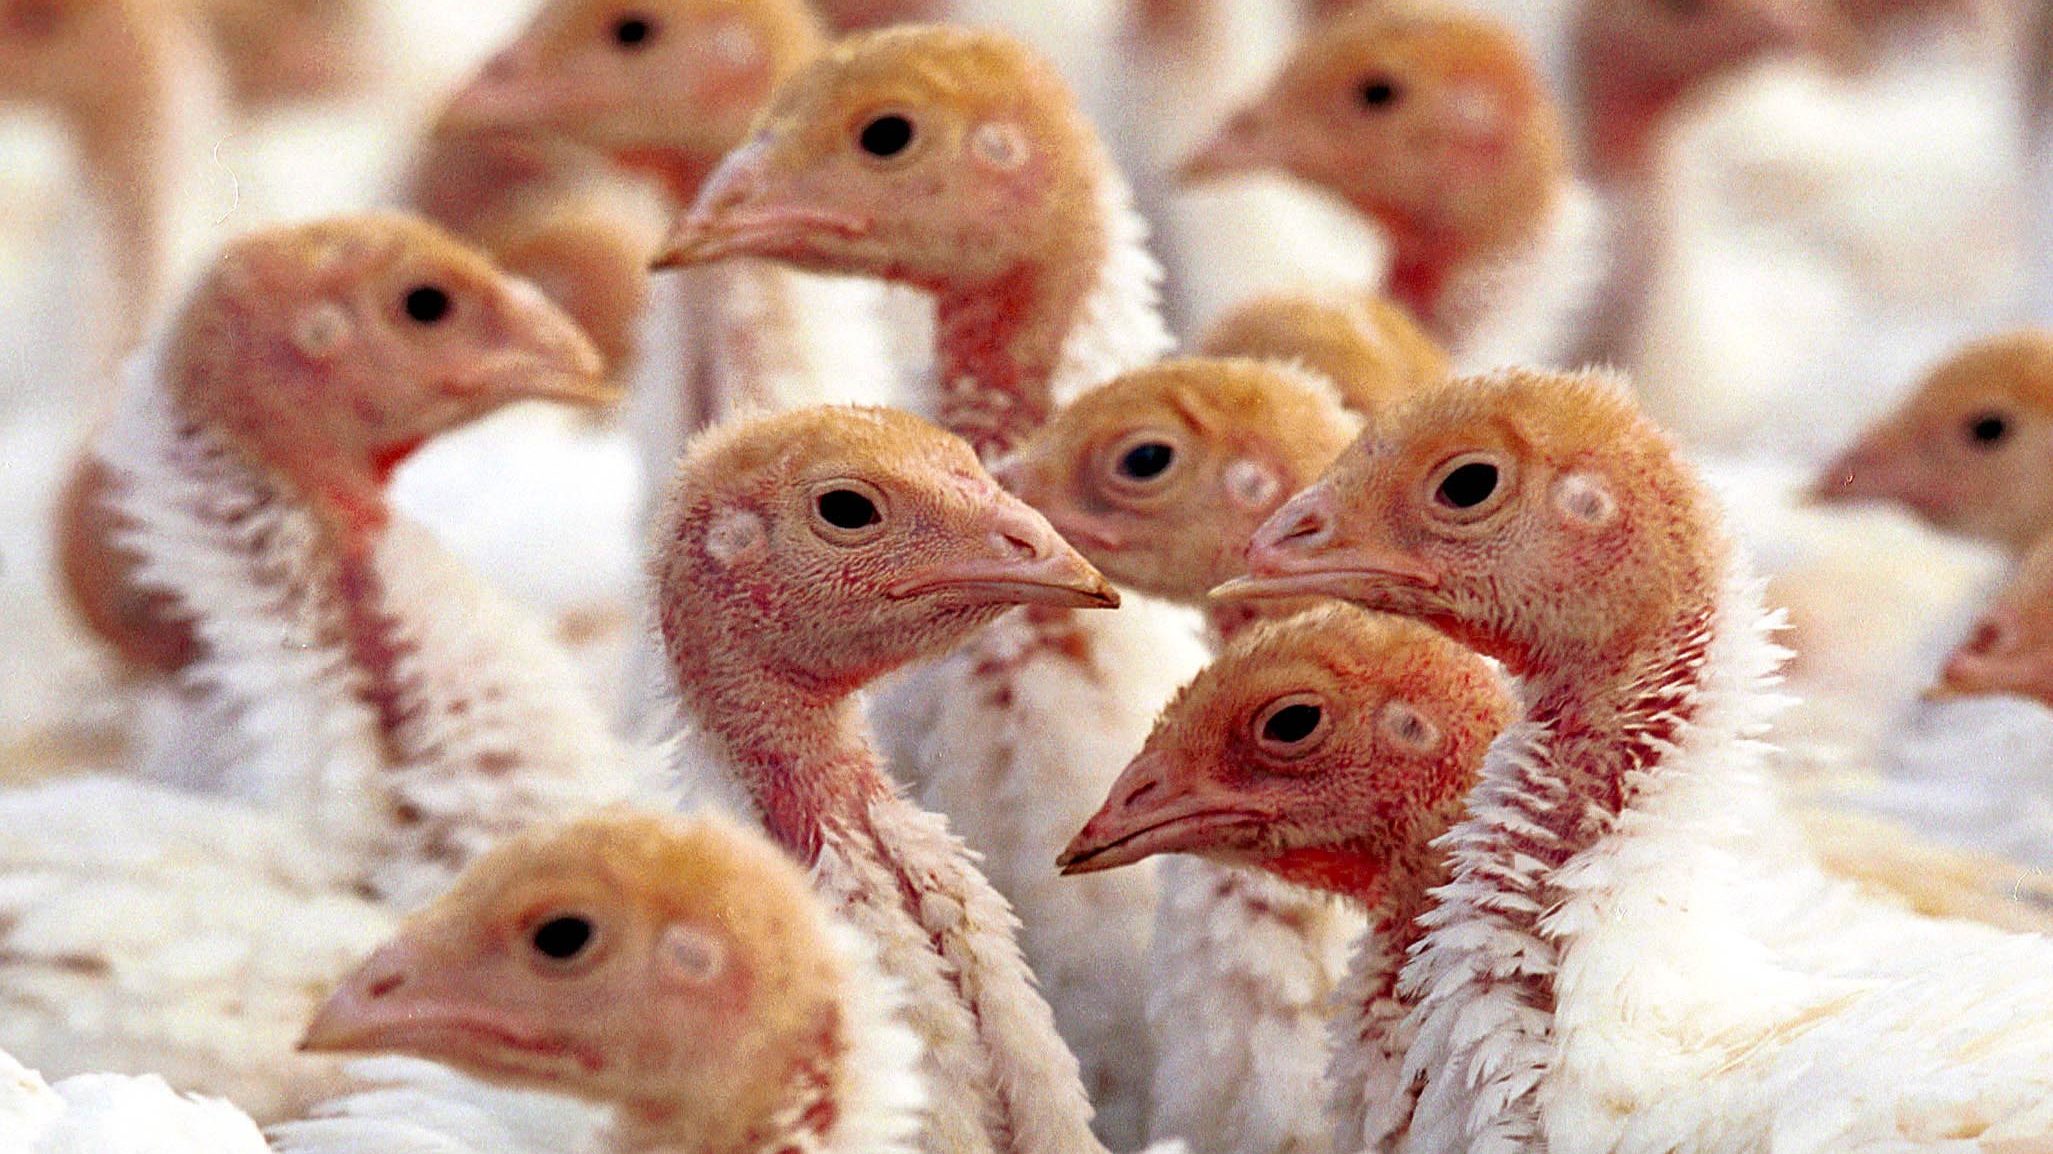  Bird flu responsible for death of 700,000 turkeys ahead of Thanksgiving, price hikes expected 